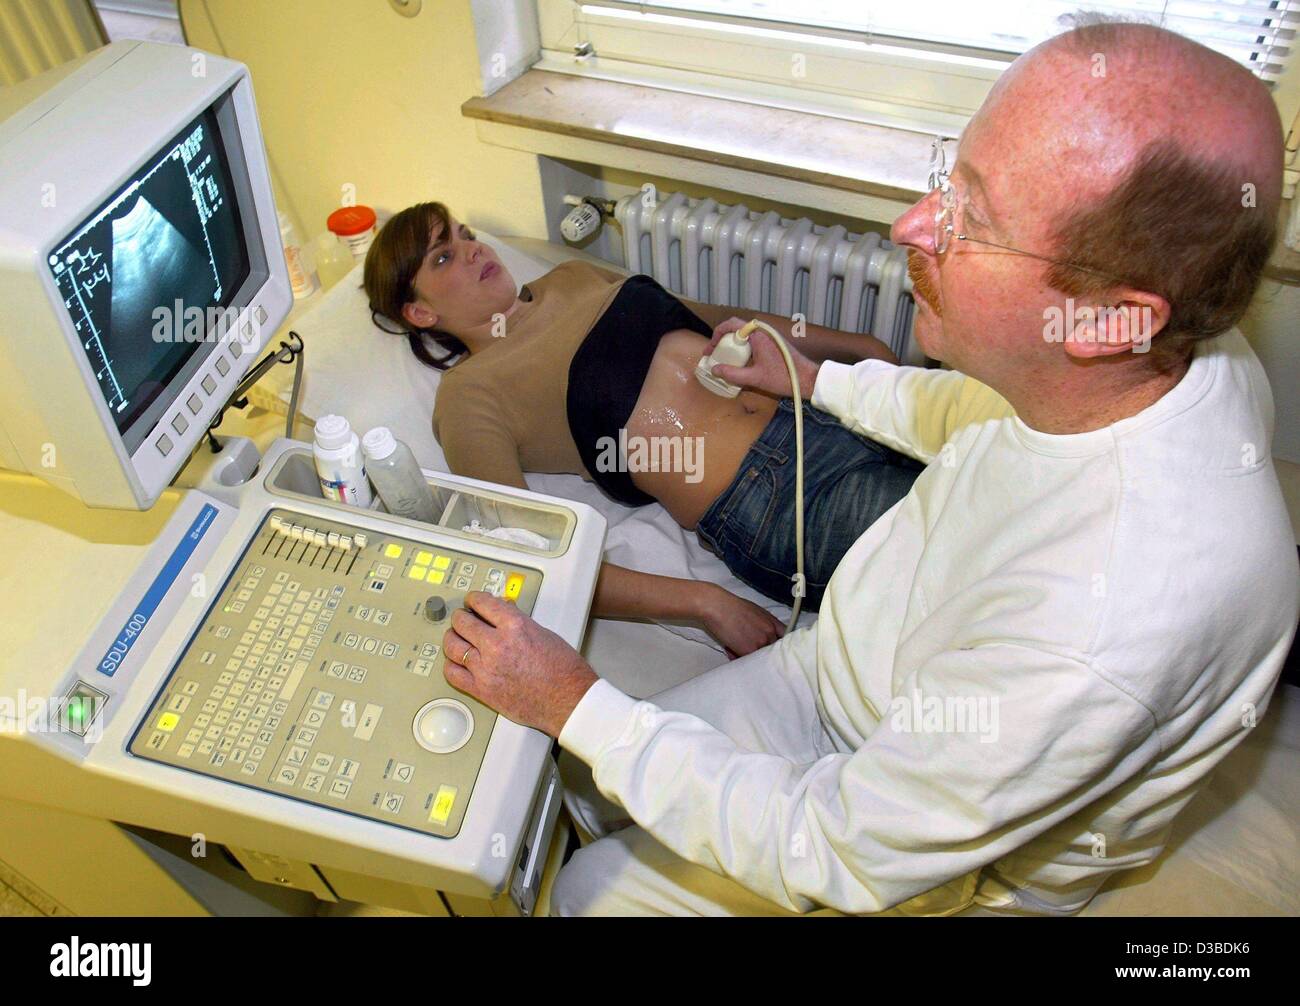 (dpa) - A doctor conducts an ultrasound scan of a patient at a doctor's practice in Duesseldorf, Germany, 23 January 2003. Stock Photo